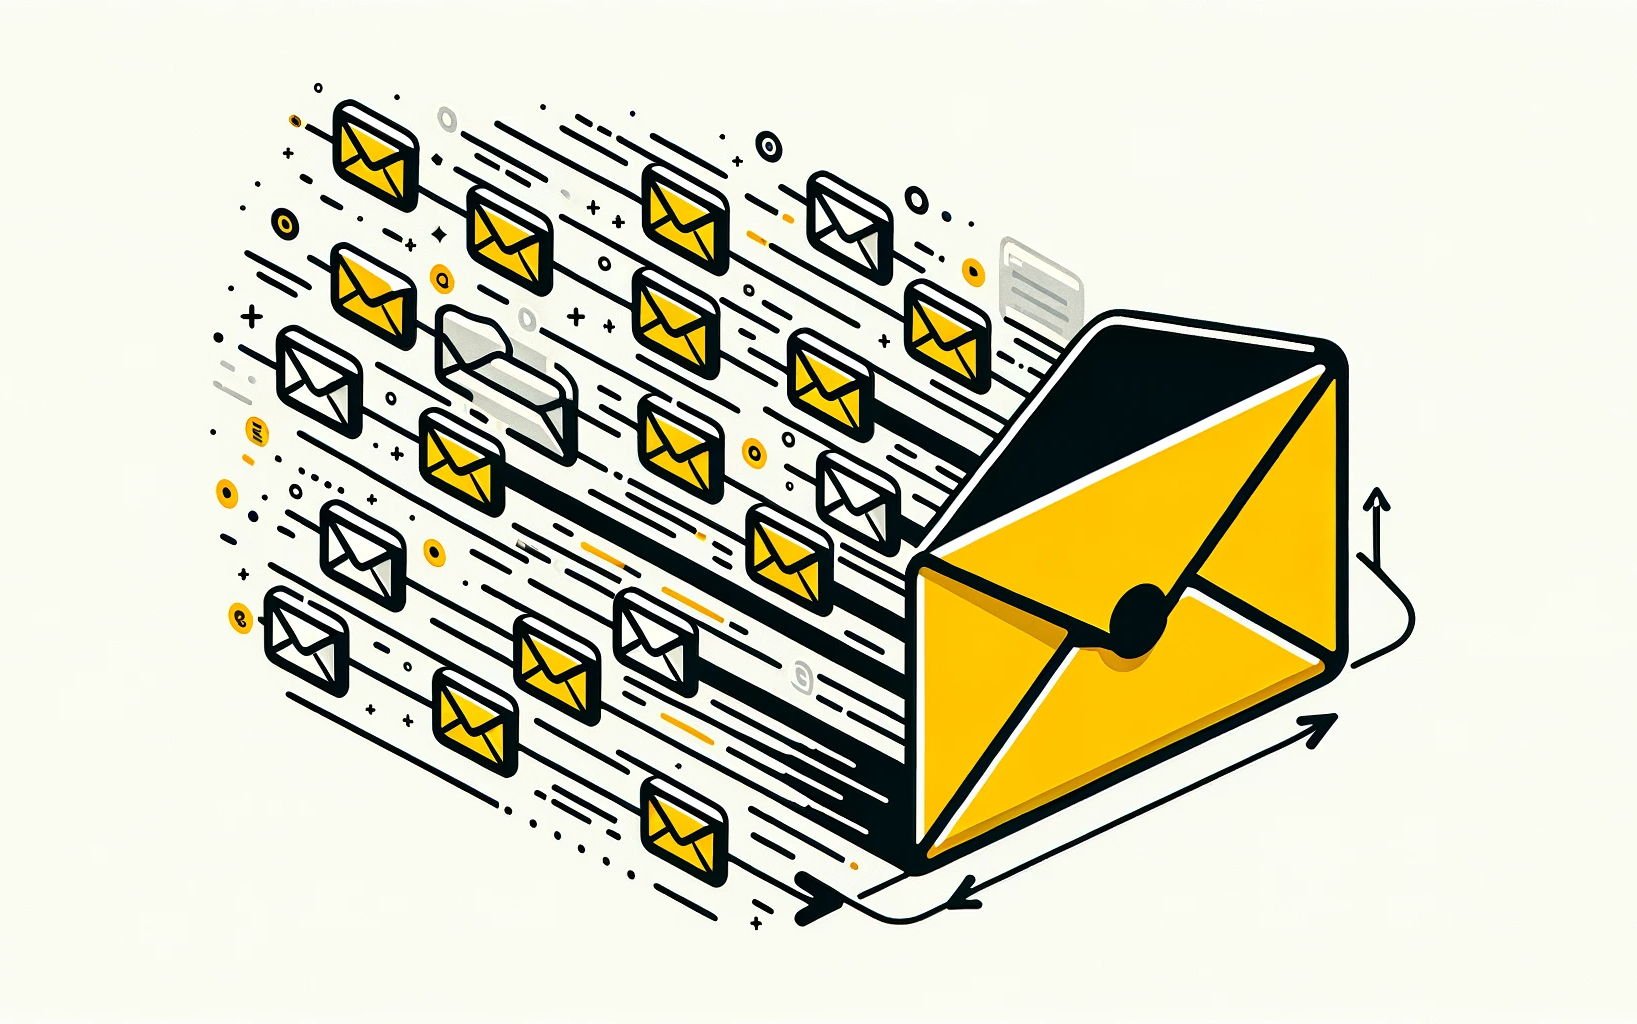 Dall·e 2023 10 31 12.19.15   create a simple and clean animated image to represent email domain automation, with dimensions of 1500px by 600px. use a color palette of yellow, blac